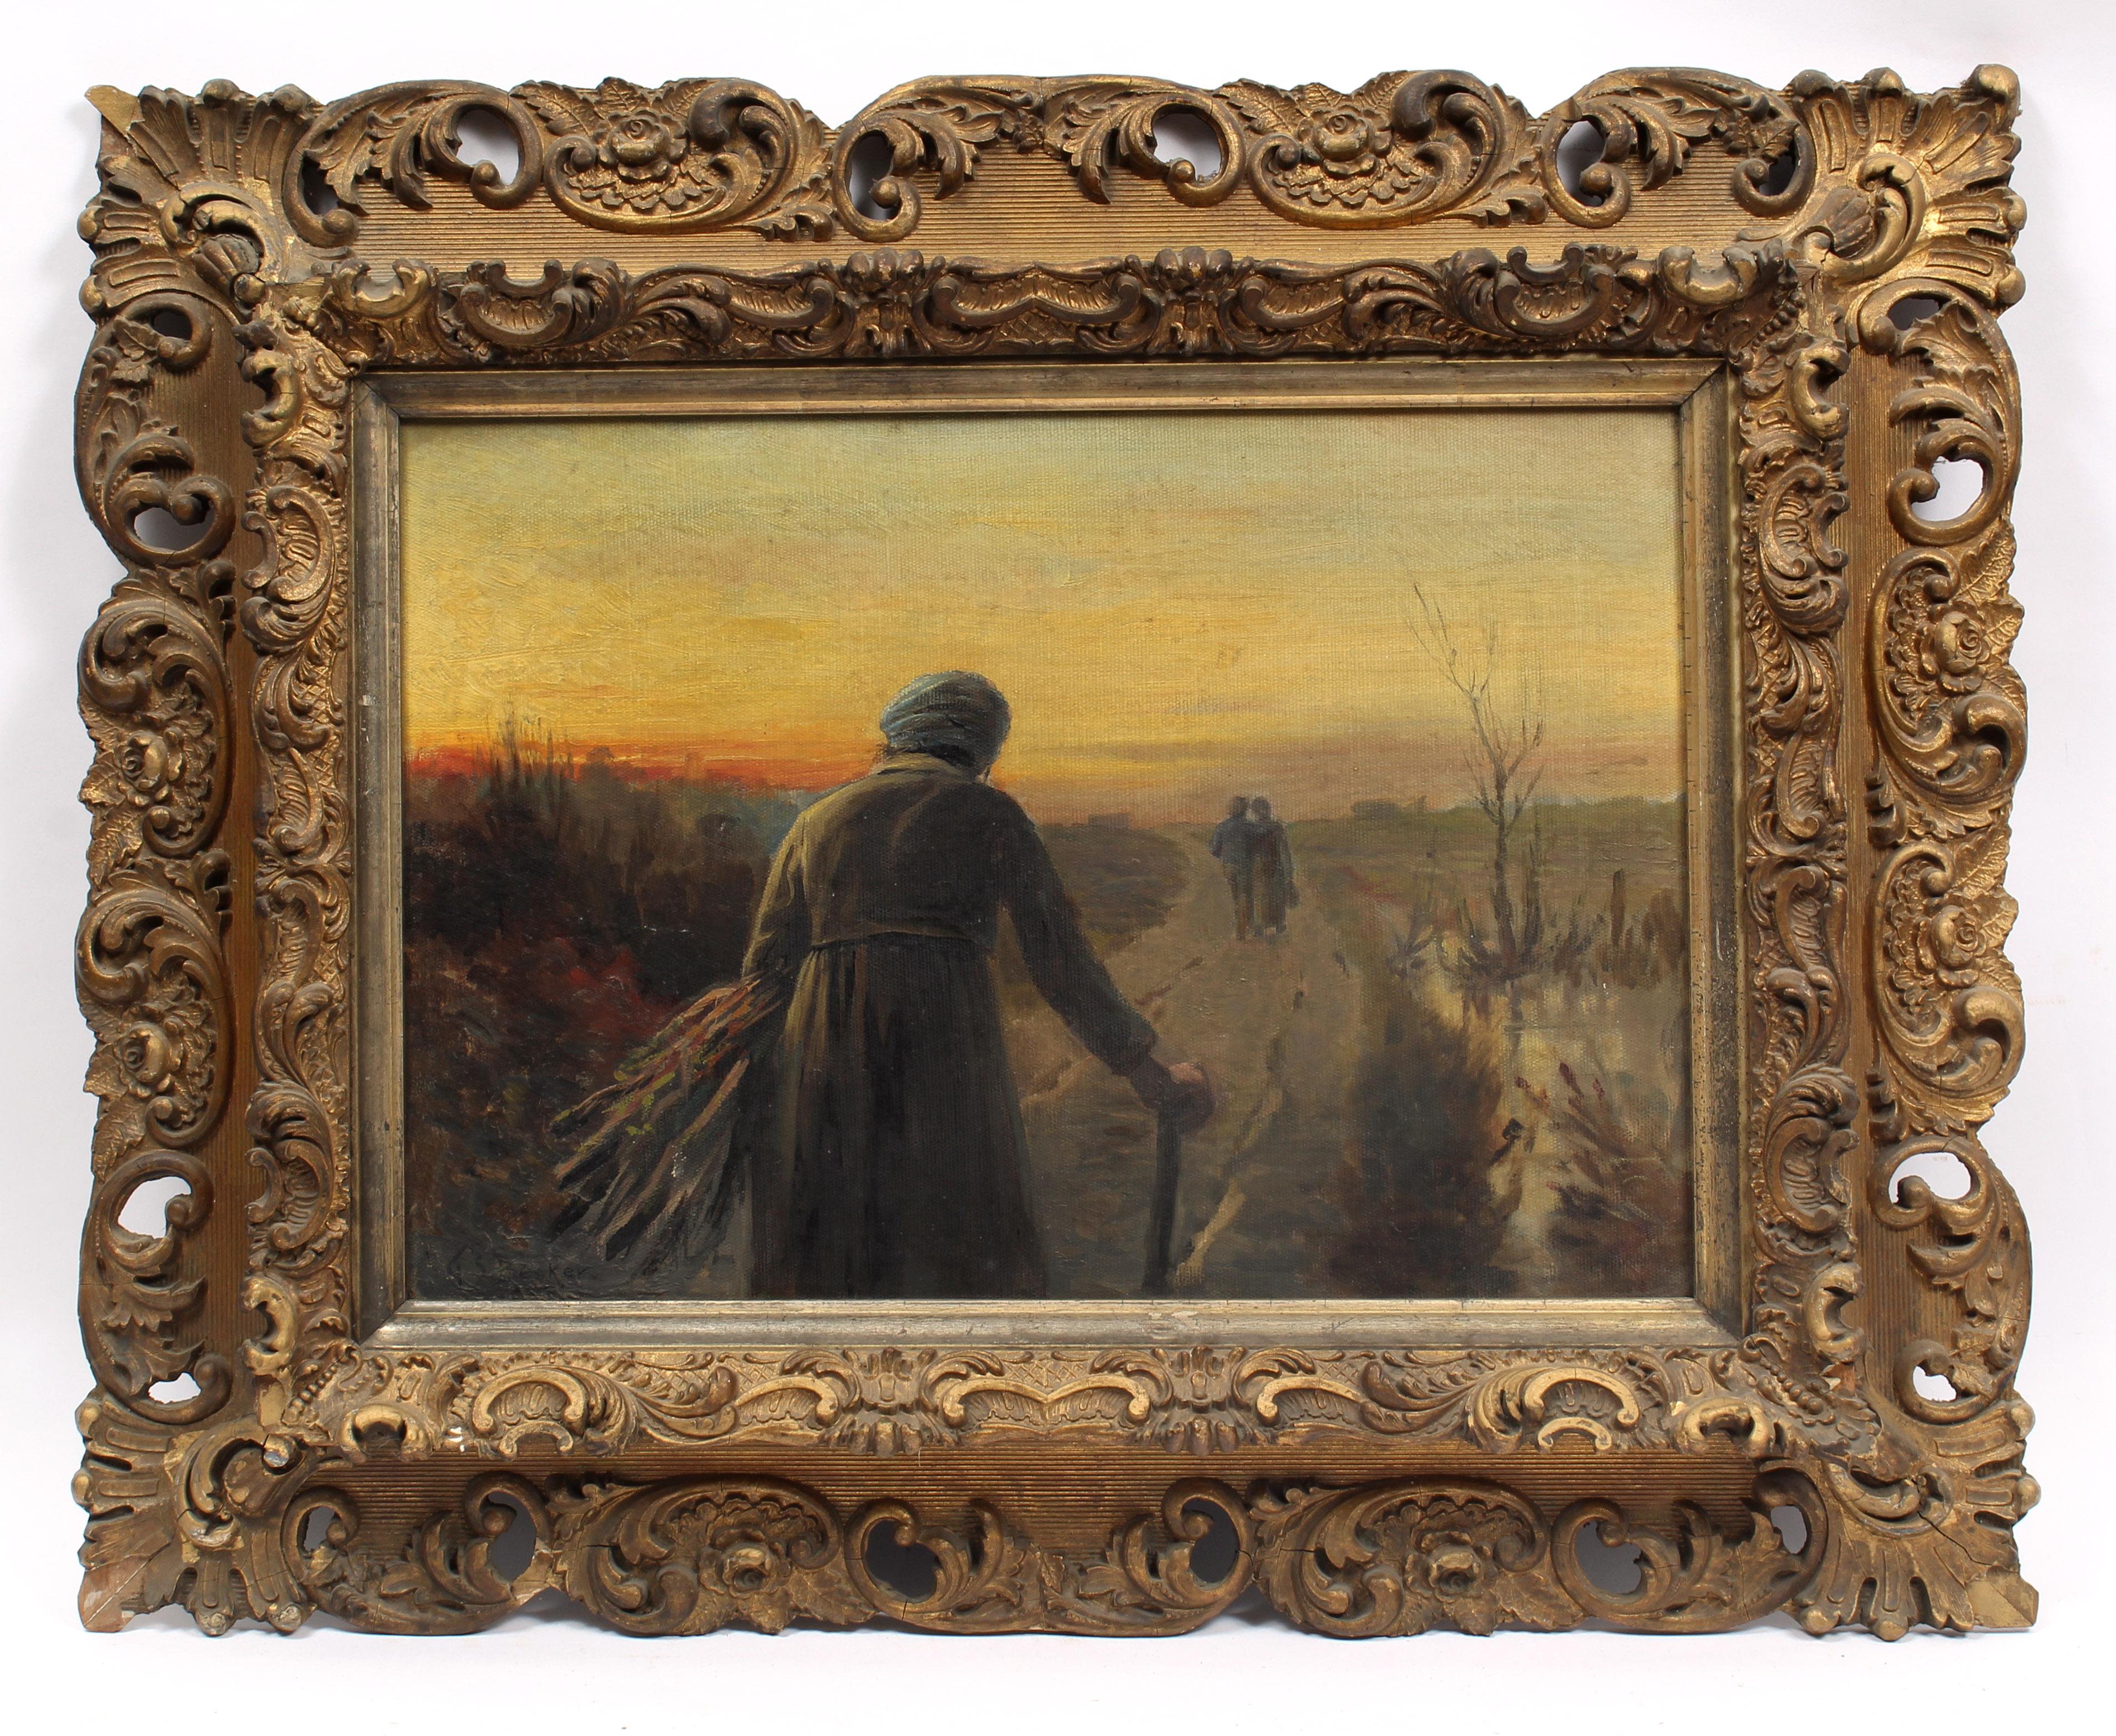 Unknown Landscape Painting - Tonalist Painting Sunset Figures Wheat Barbizon Framed 19th Century Oil Painting